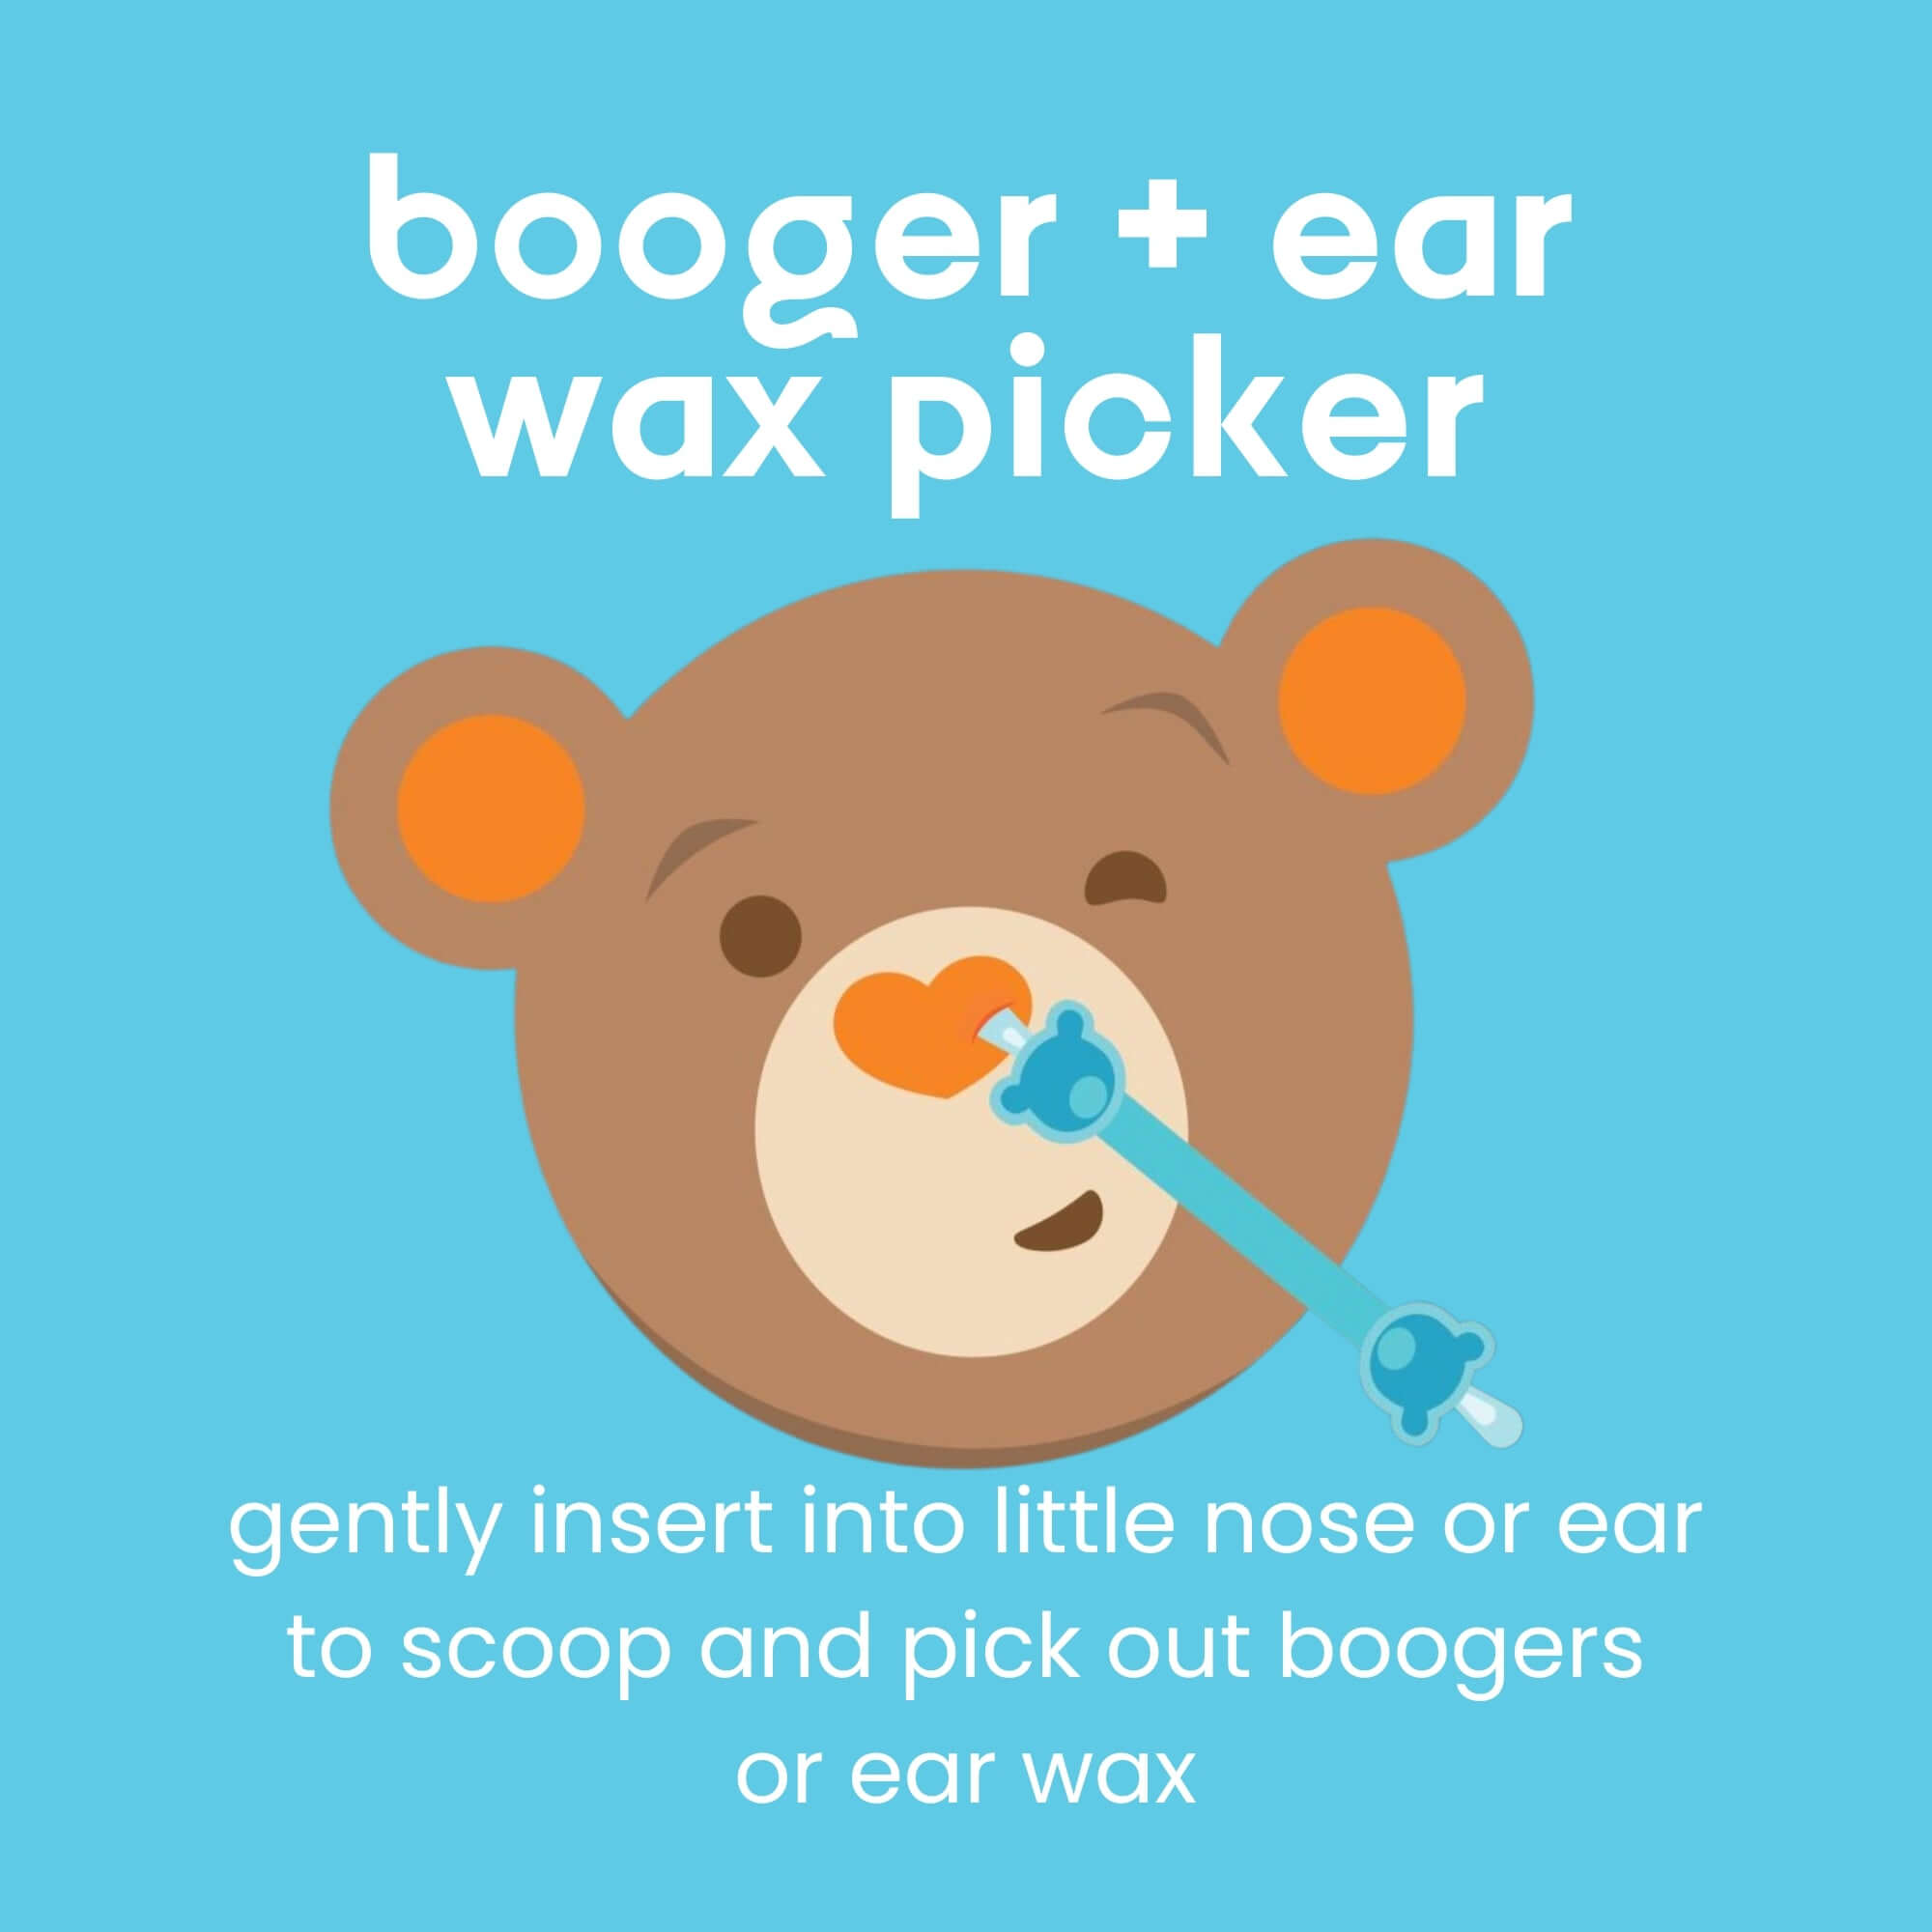 NEW - OOGIEBEAR - Comes with Case - Removes Babys Boogers & Earwax  effectively